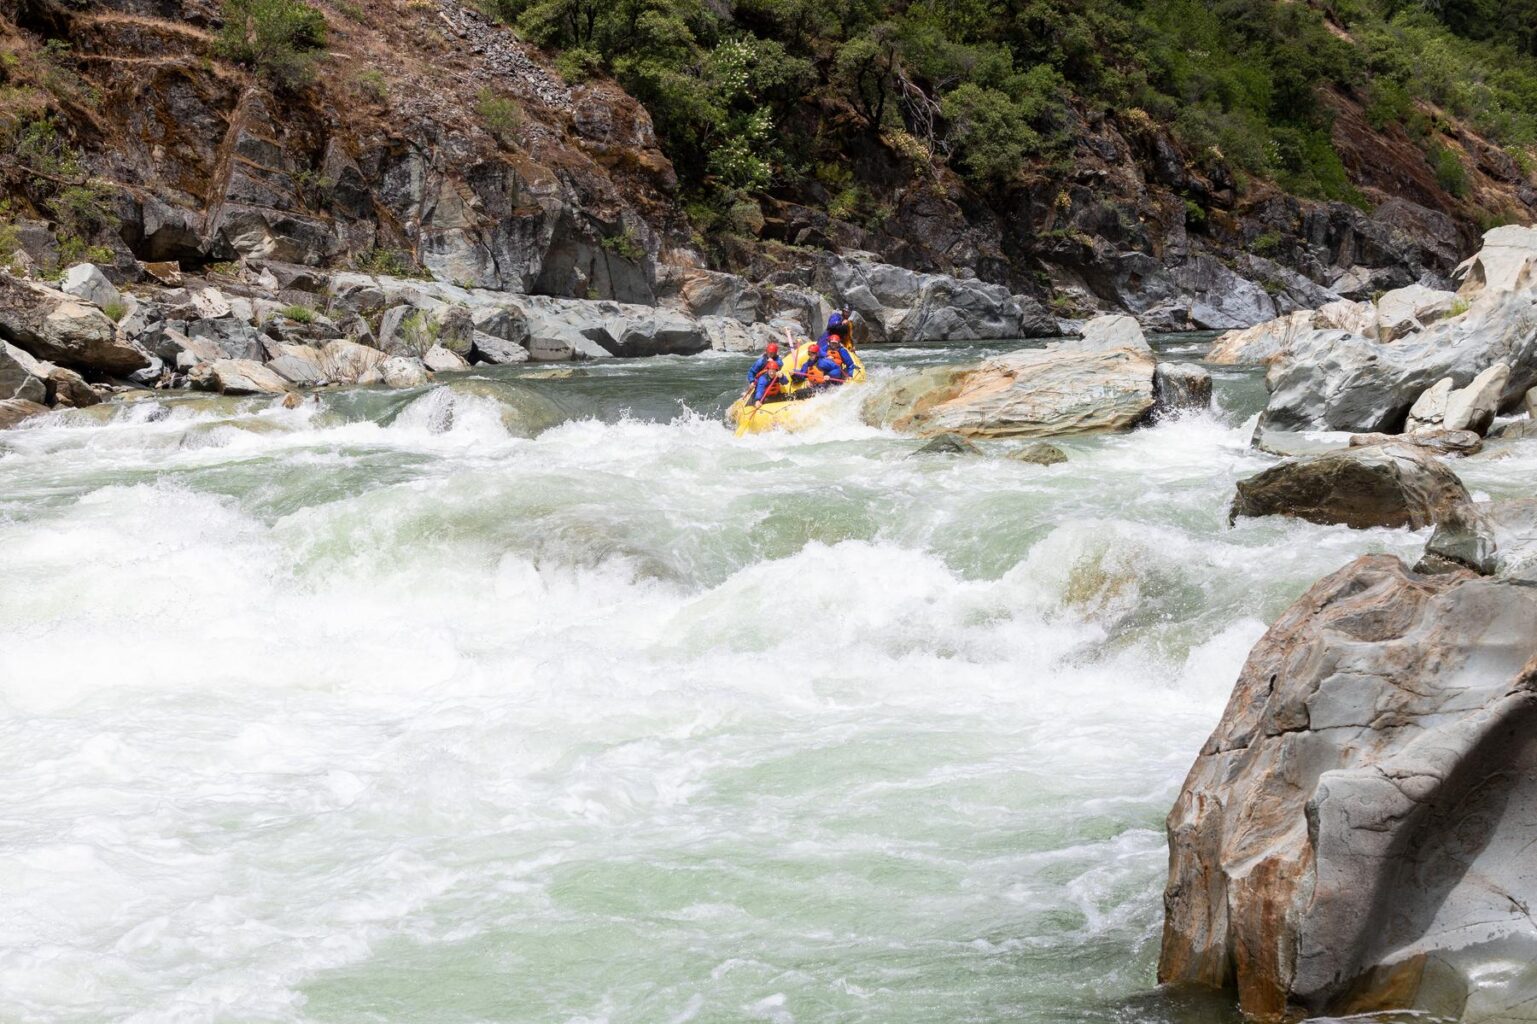 Dropping Bogus Thunder on the North Fork of the American River